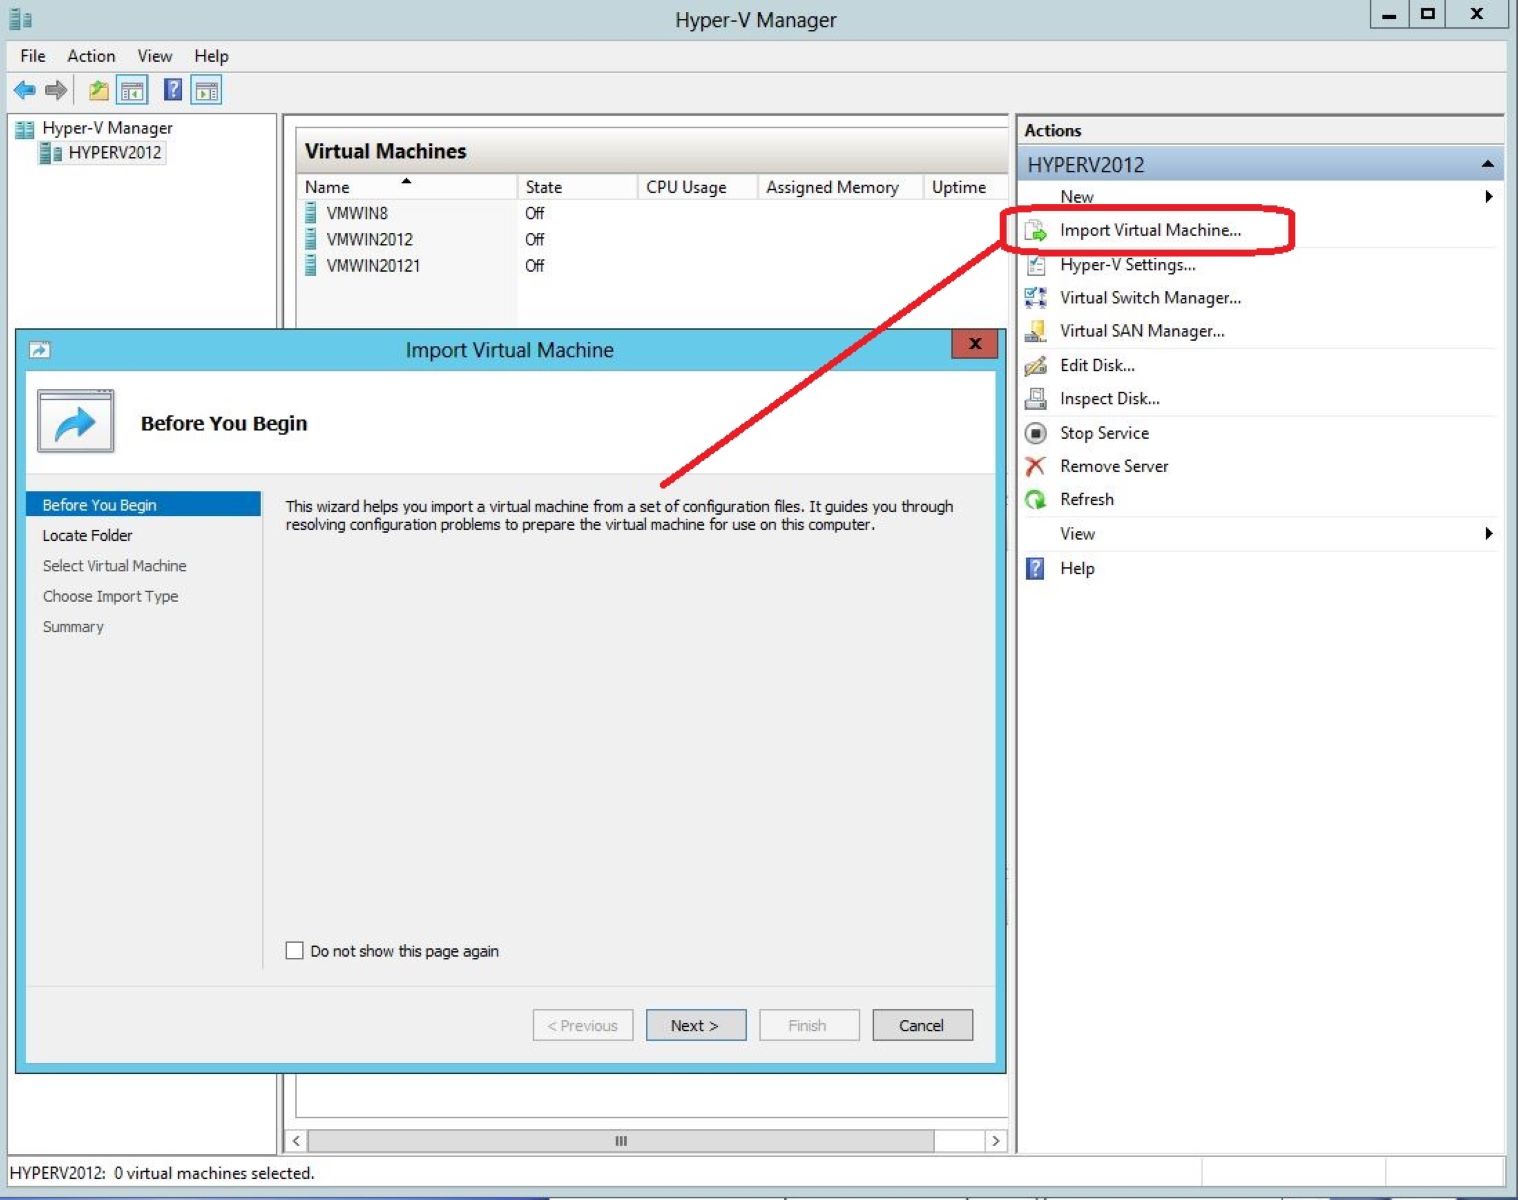 Which Of The Following Options Are Available When You Select The Import Virtual Machine Wizard?